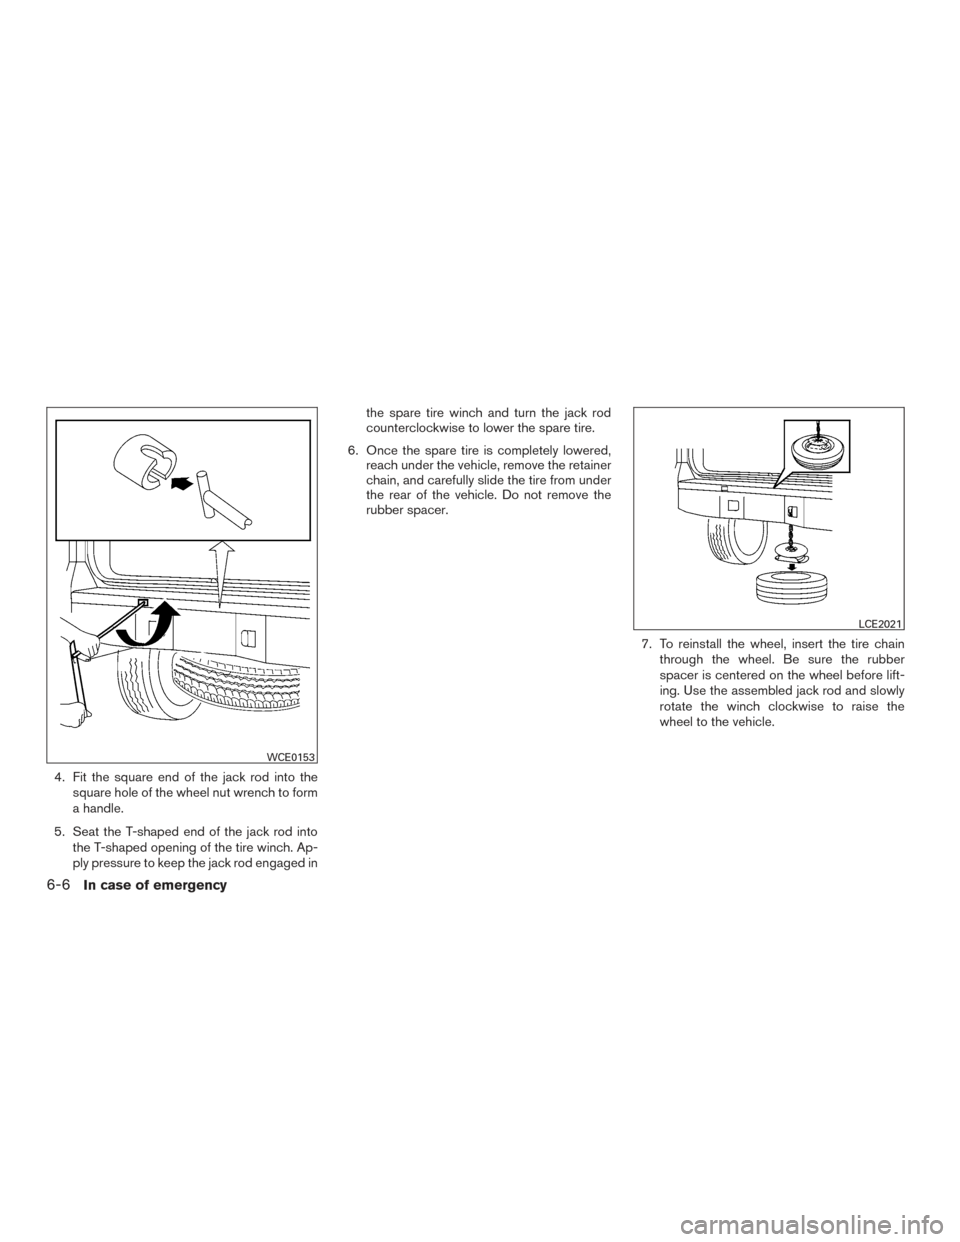 NISSAN XTERRA 2015 N50 / 2.G User Guide 4. Fit the square end of the jack rod into thesquare hole of the wheel nut wrench to form
a handle.
5. Seat the T-shaped end of the jack rod into the T-shaped opening of the tire winch. Ap-
ply pressu